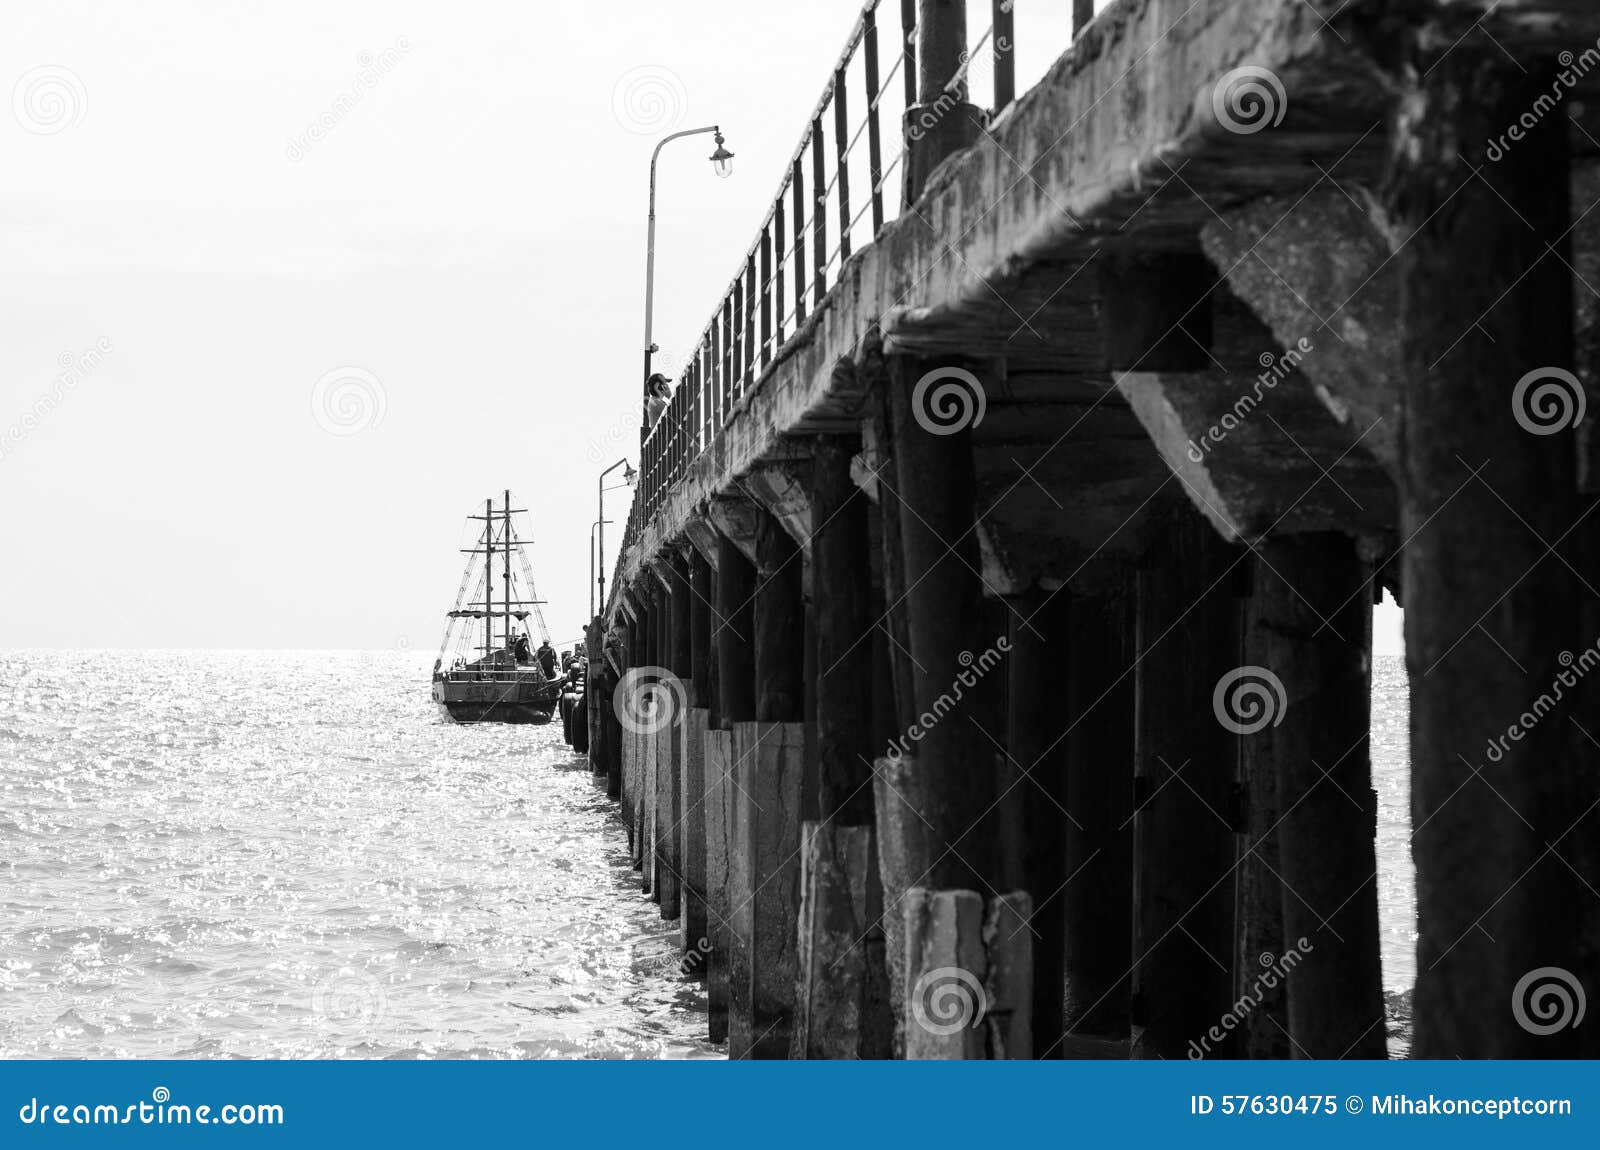 Sailing Ship Near the Pier. Black and White Photo. Editorial Image ...